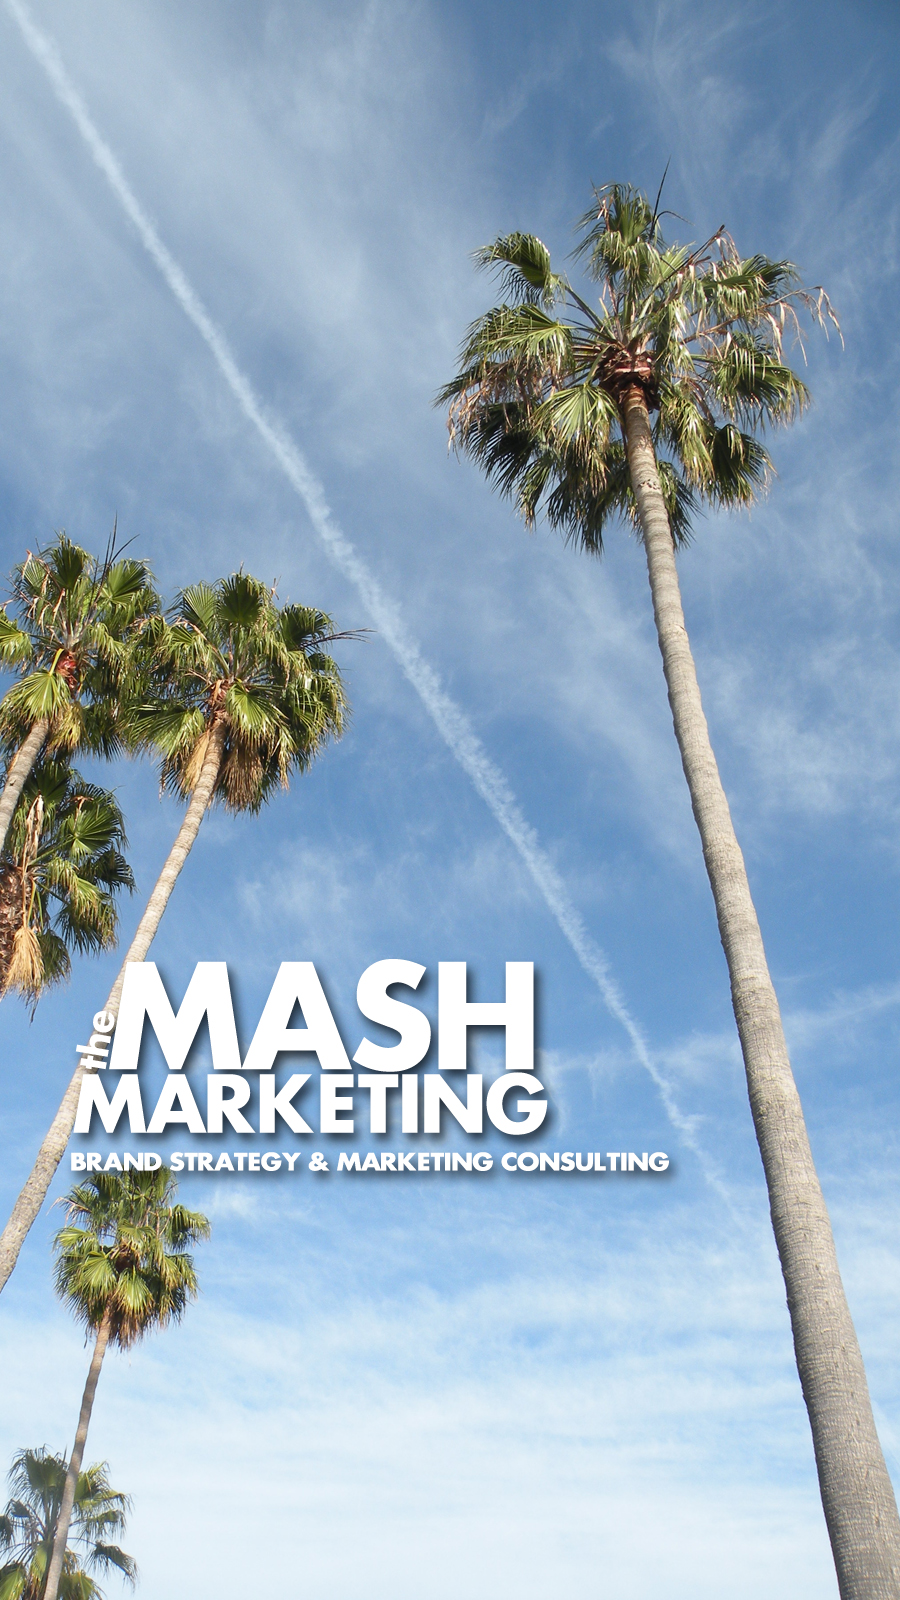 The Mash Marketing Brand Strategy and Marketing Consulting